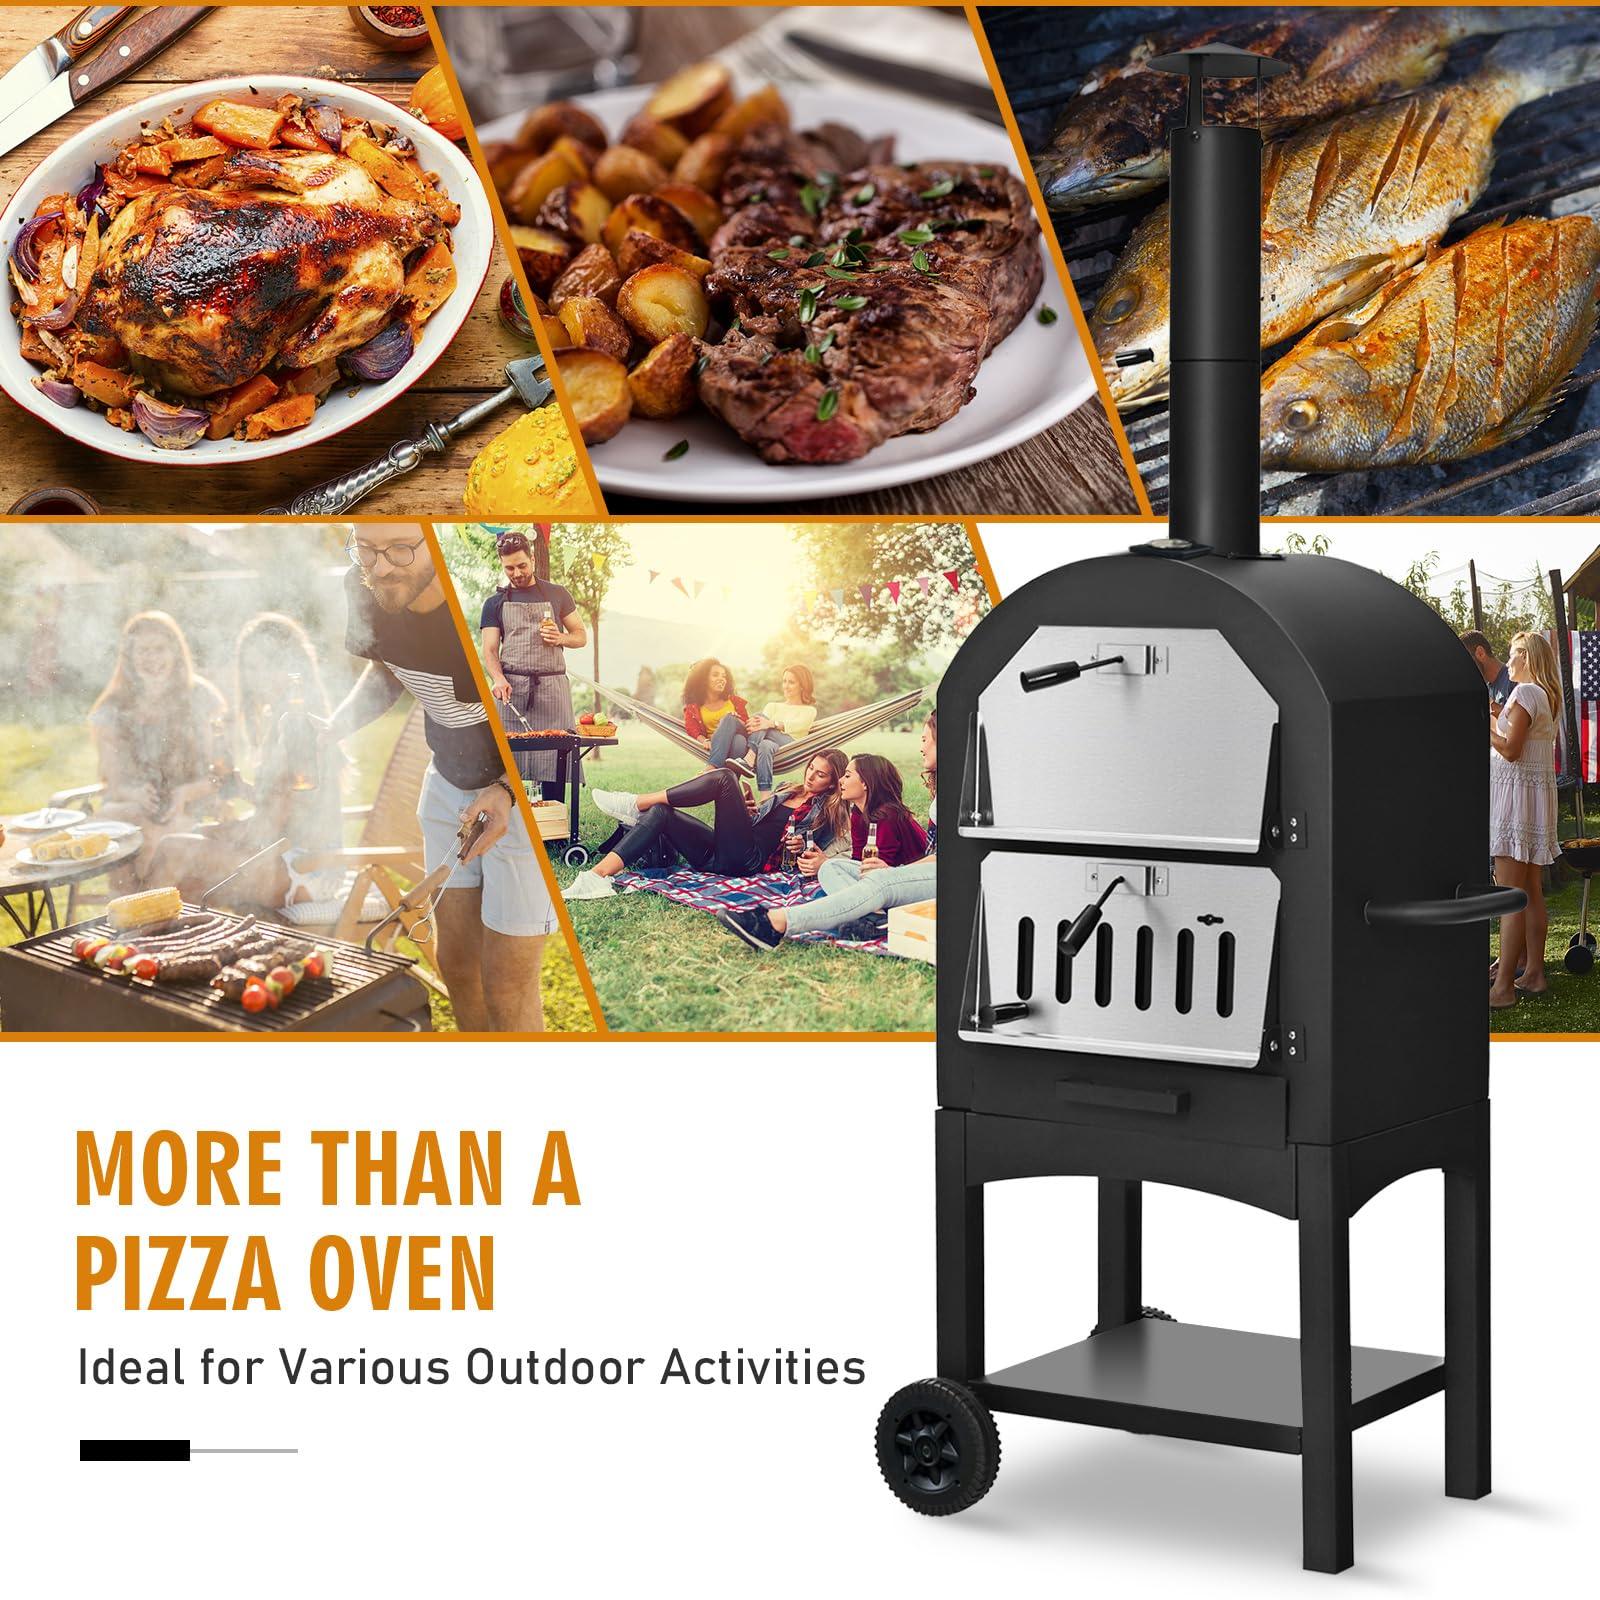 Happygrill Outdoor Pizza Oven Wood Fired Pizza Maker with 2 Wheels, Built-in Thermometer, Pizza Stone, Pizza Peel, Waterproof Cover, Portable Pizza Oven Heater for Barbecue Picnic Camping - CookCave